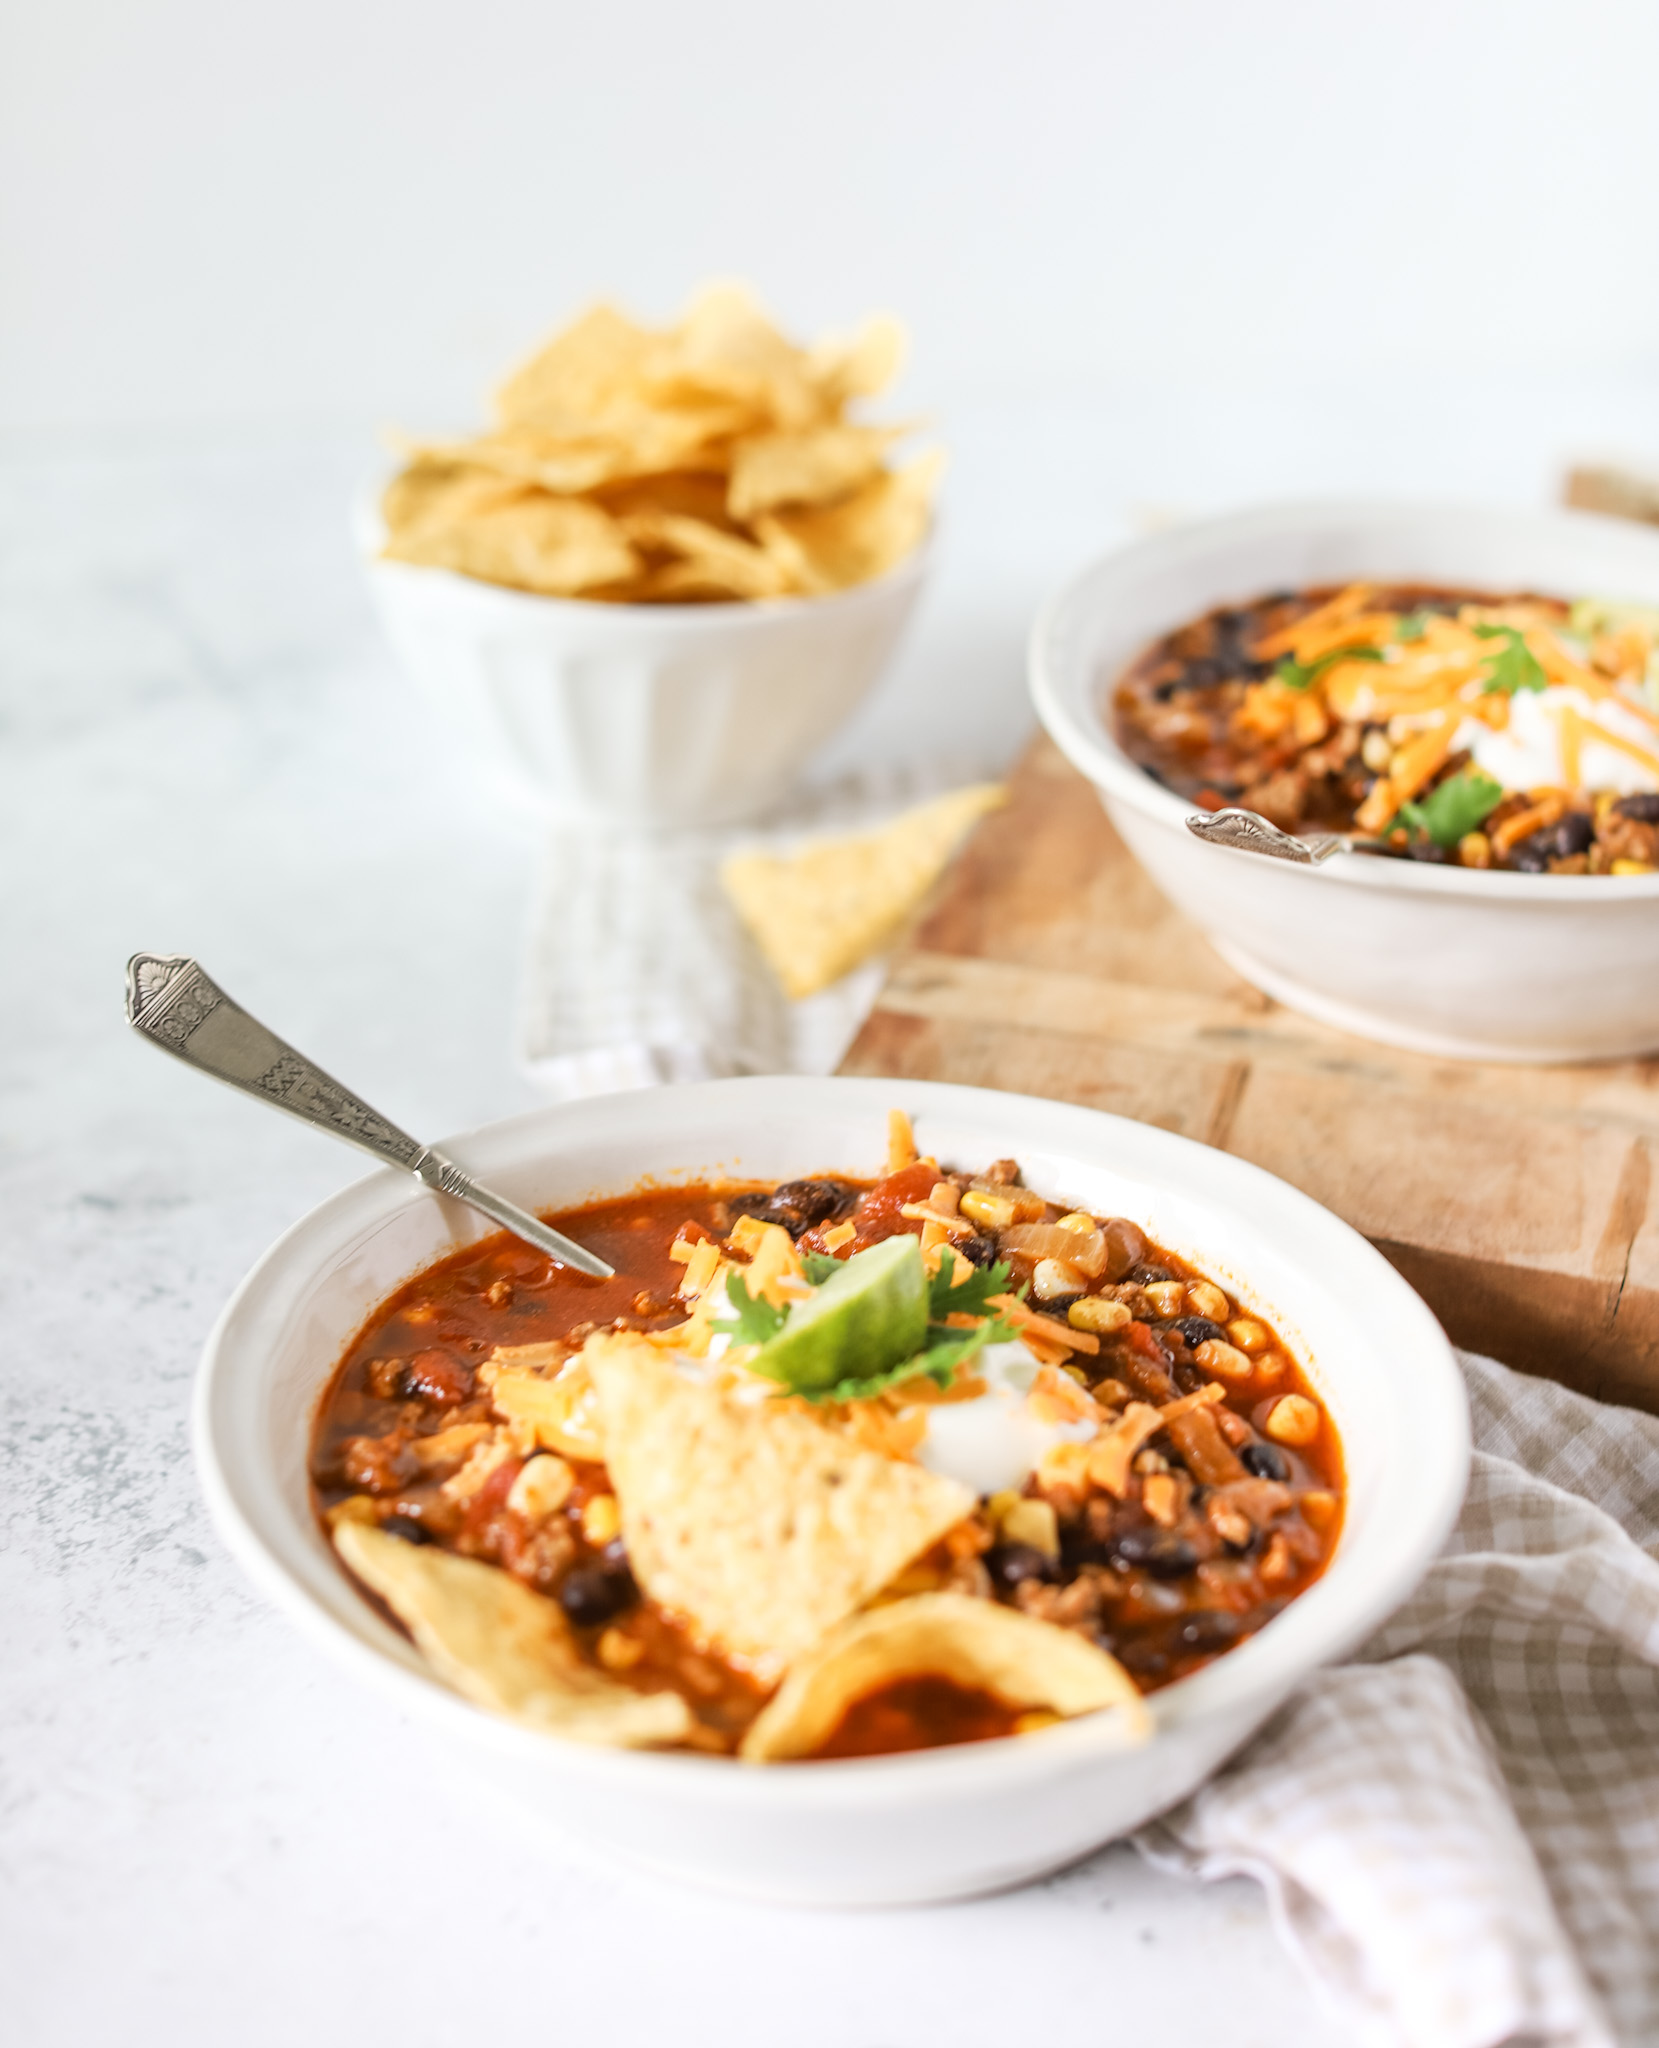 Southwest Chili served with tortilla chips